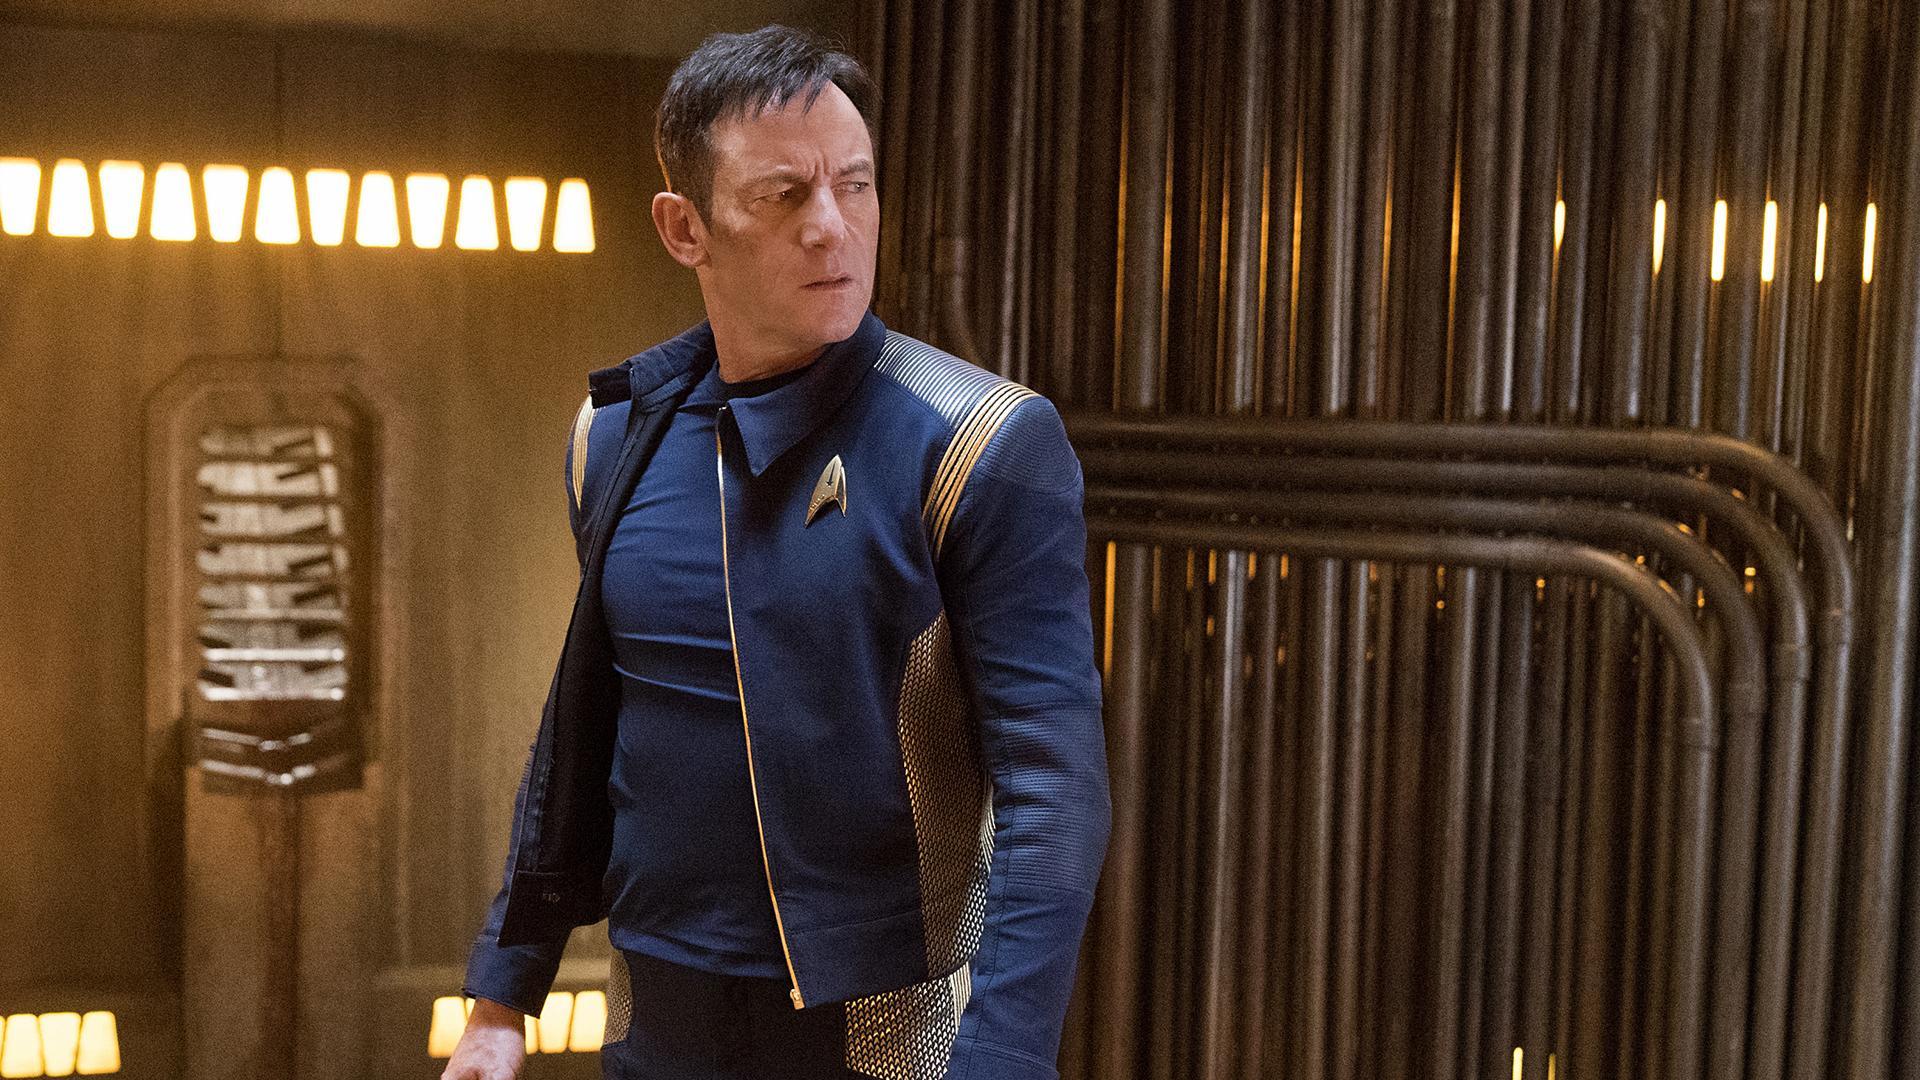 Check Out New Photo From Episode 5 Of Star Trek: Discovery